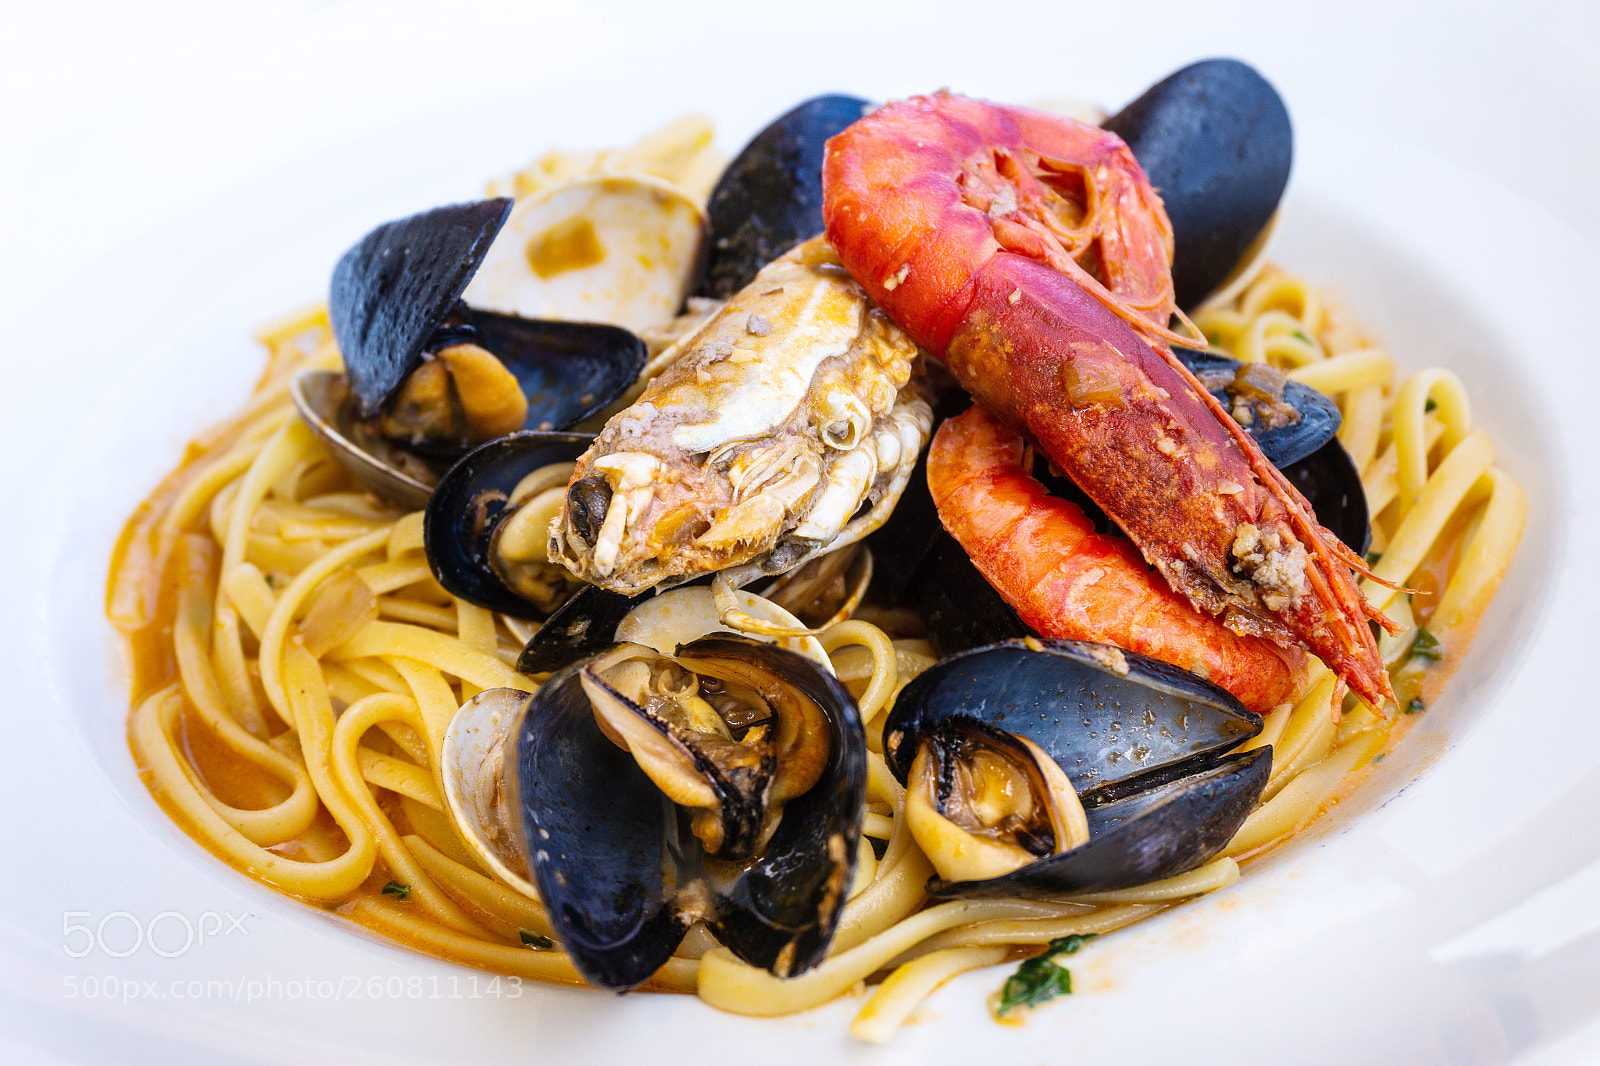 Sony a6000 sample photo. Pasta with seafood dinner photography